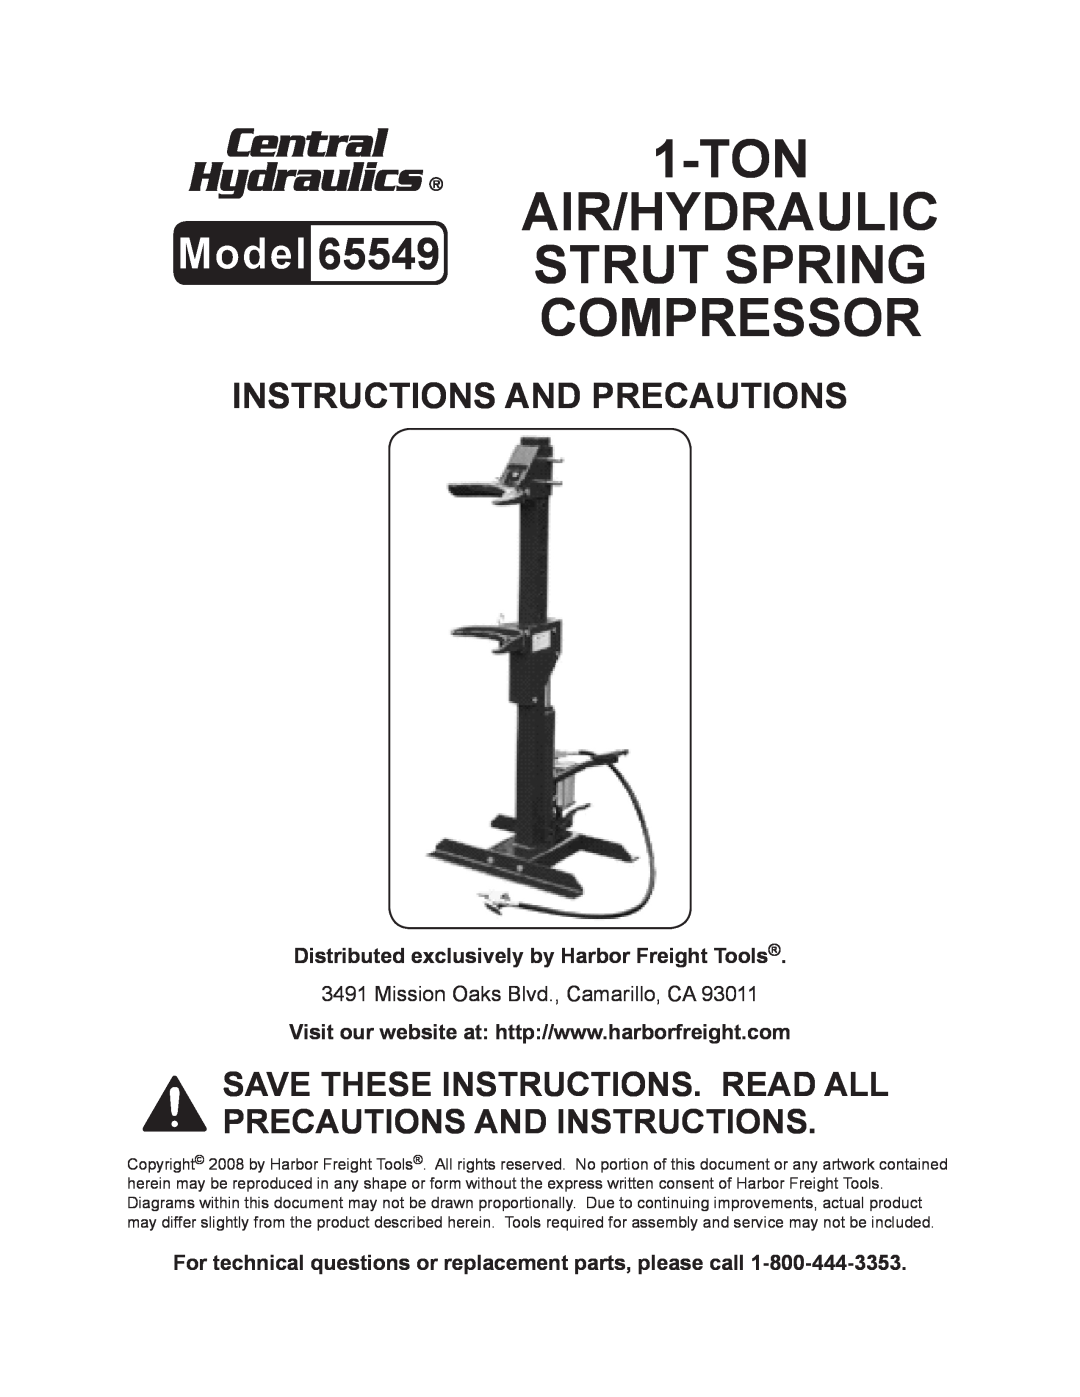 Harbor Freight Tools 65549 manual Save these instructions. Read all precautions and instructions 